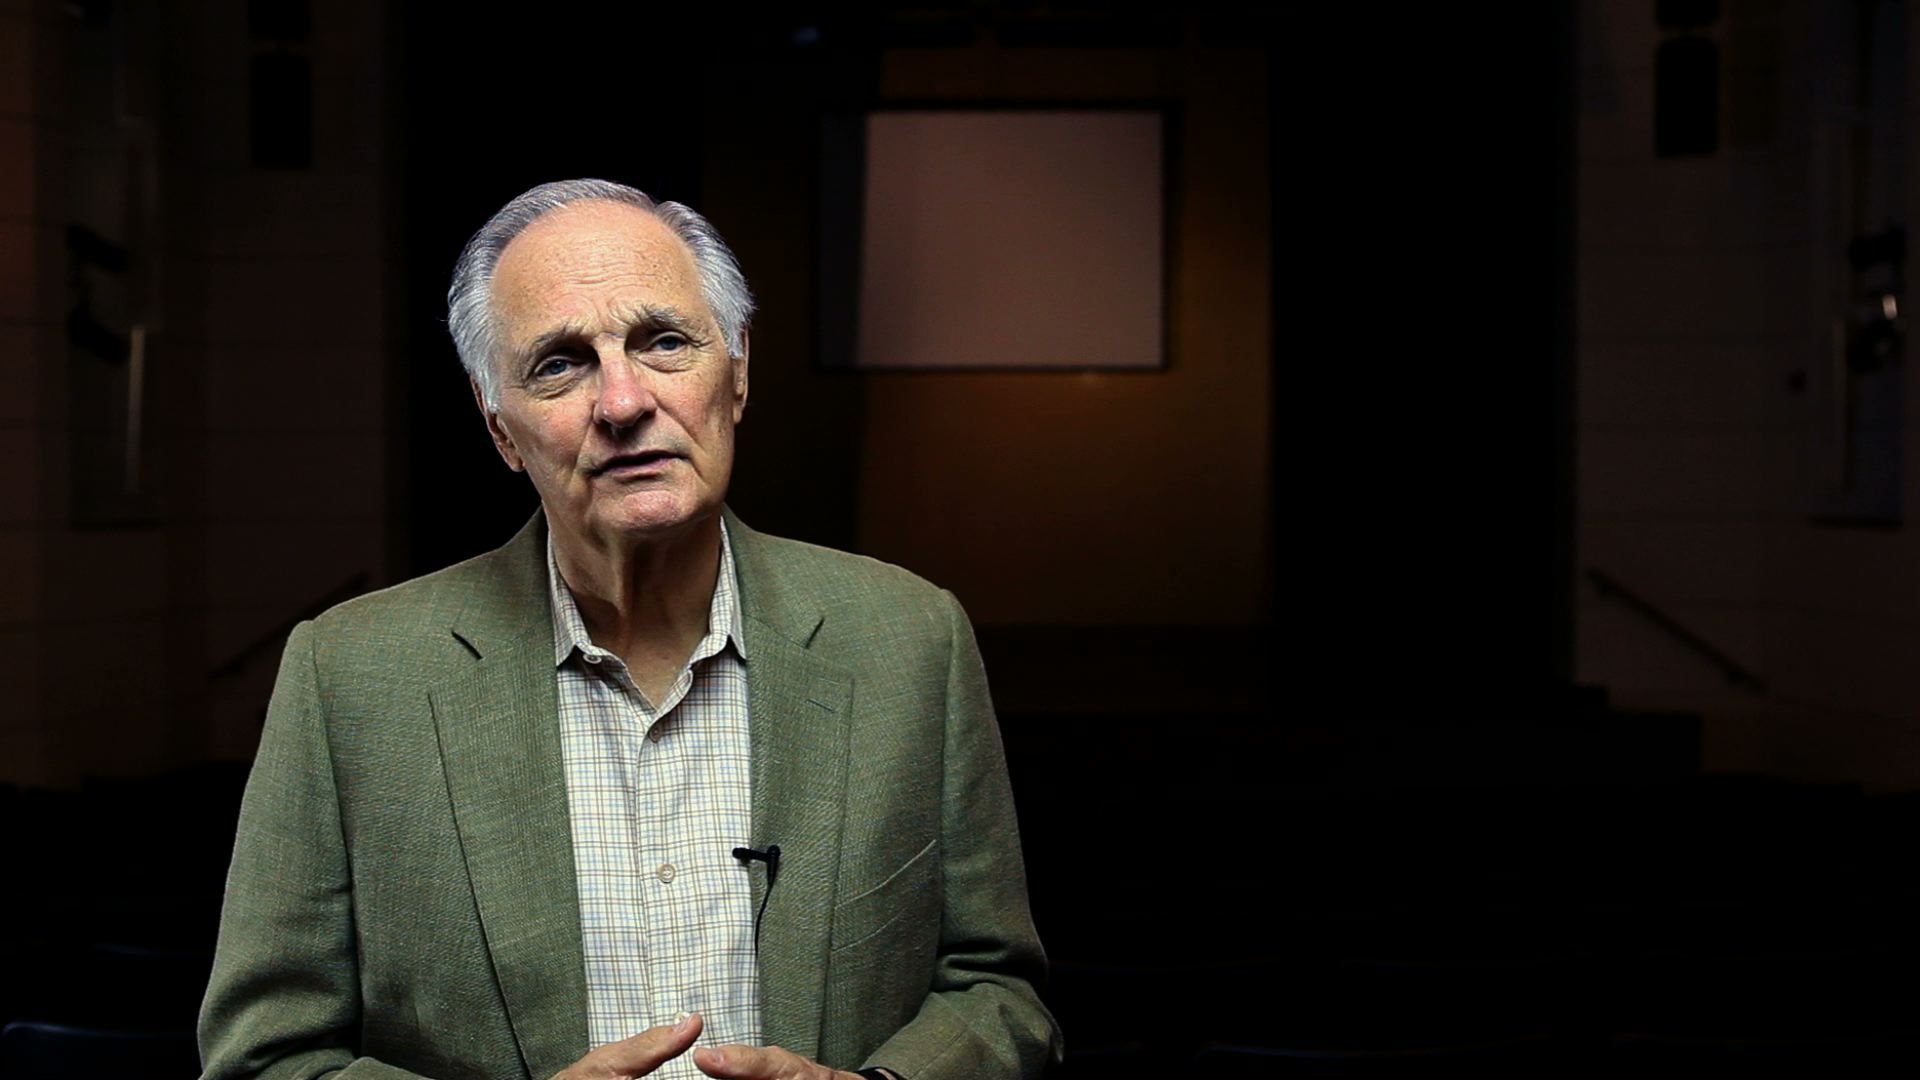 Alan Alda speaks about his first movie experience. This was in 